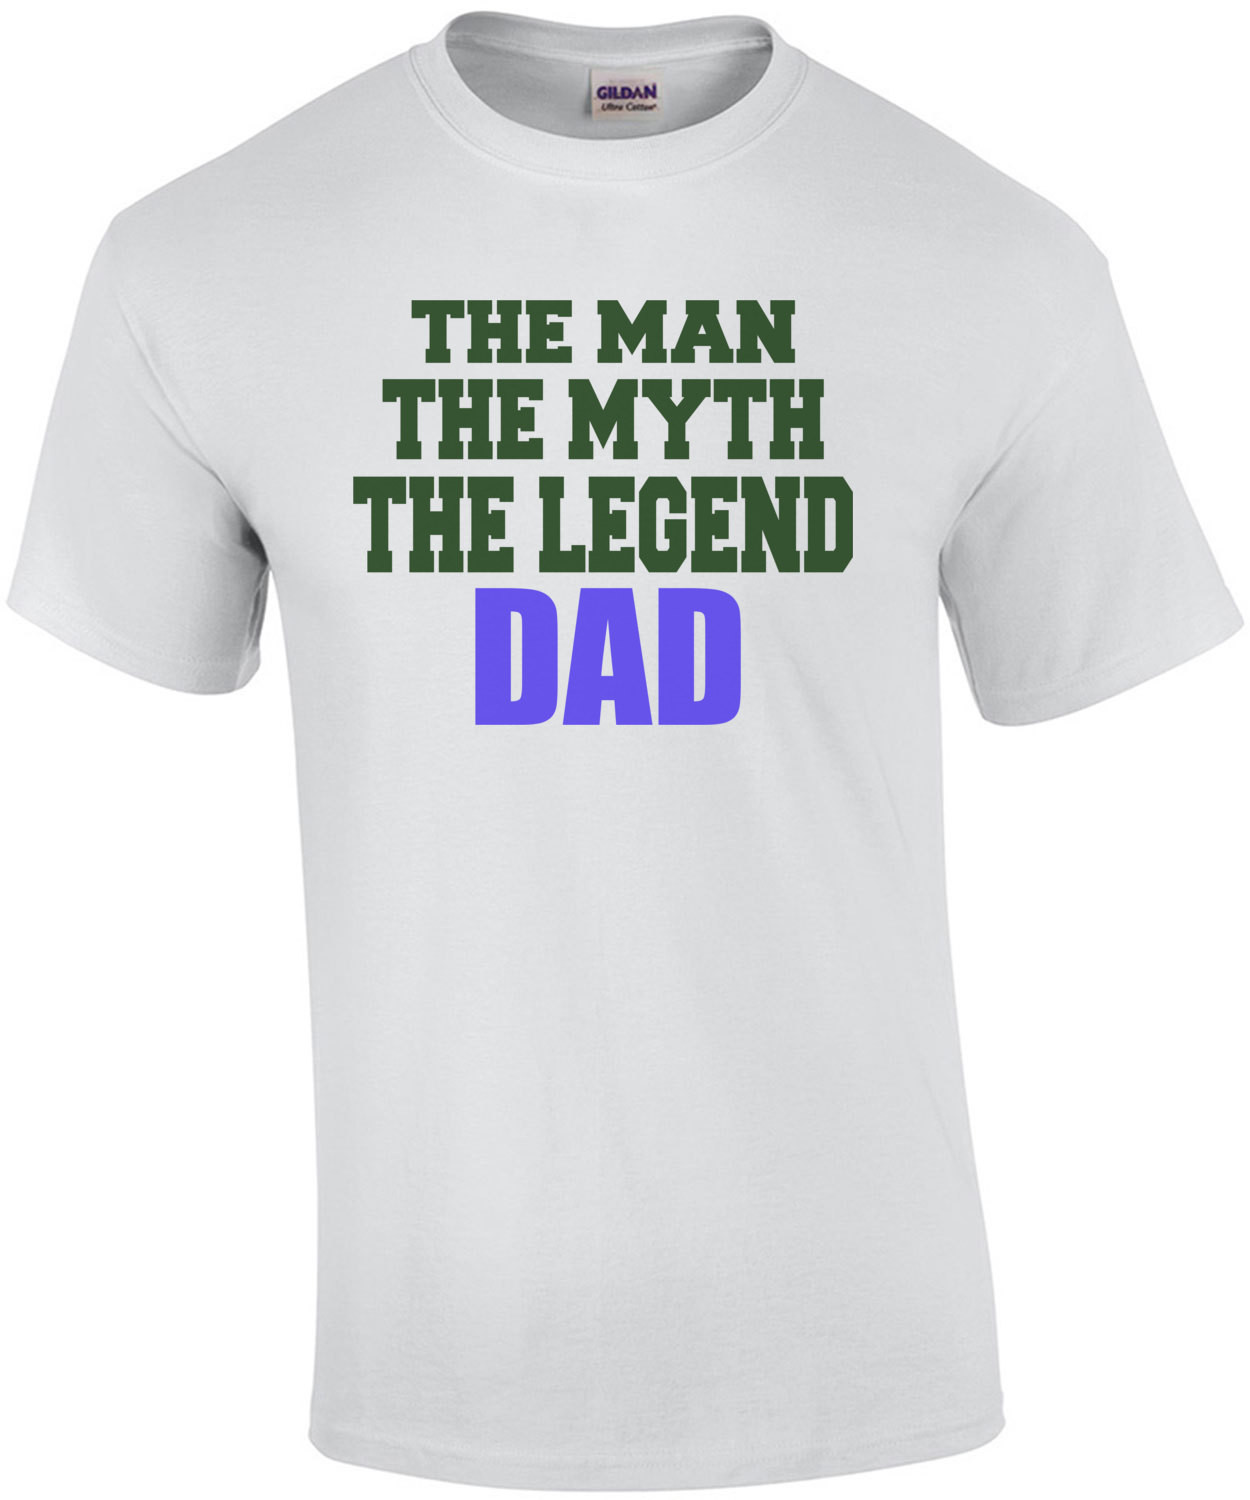 The Man The Myth The Legend Dad T-Shirt